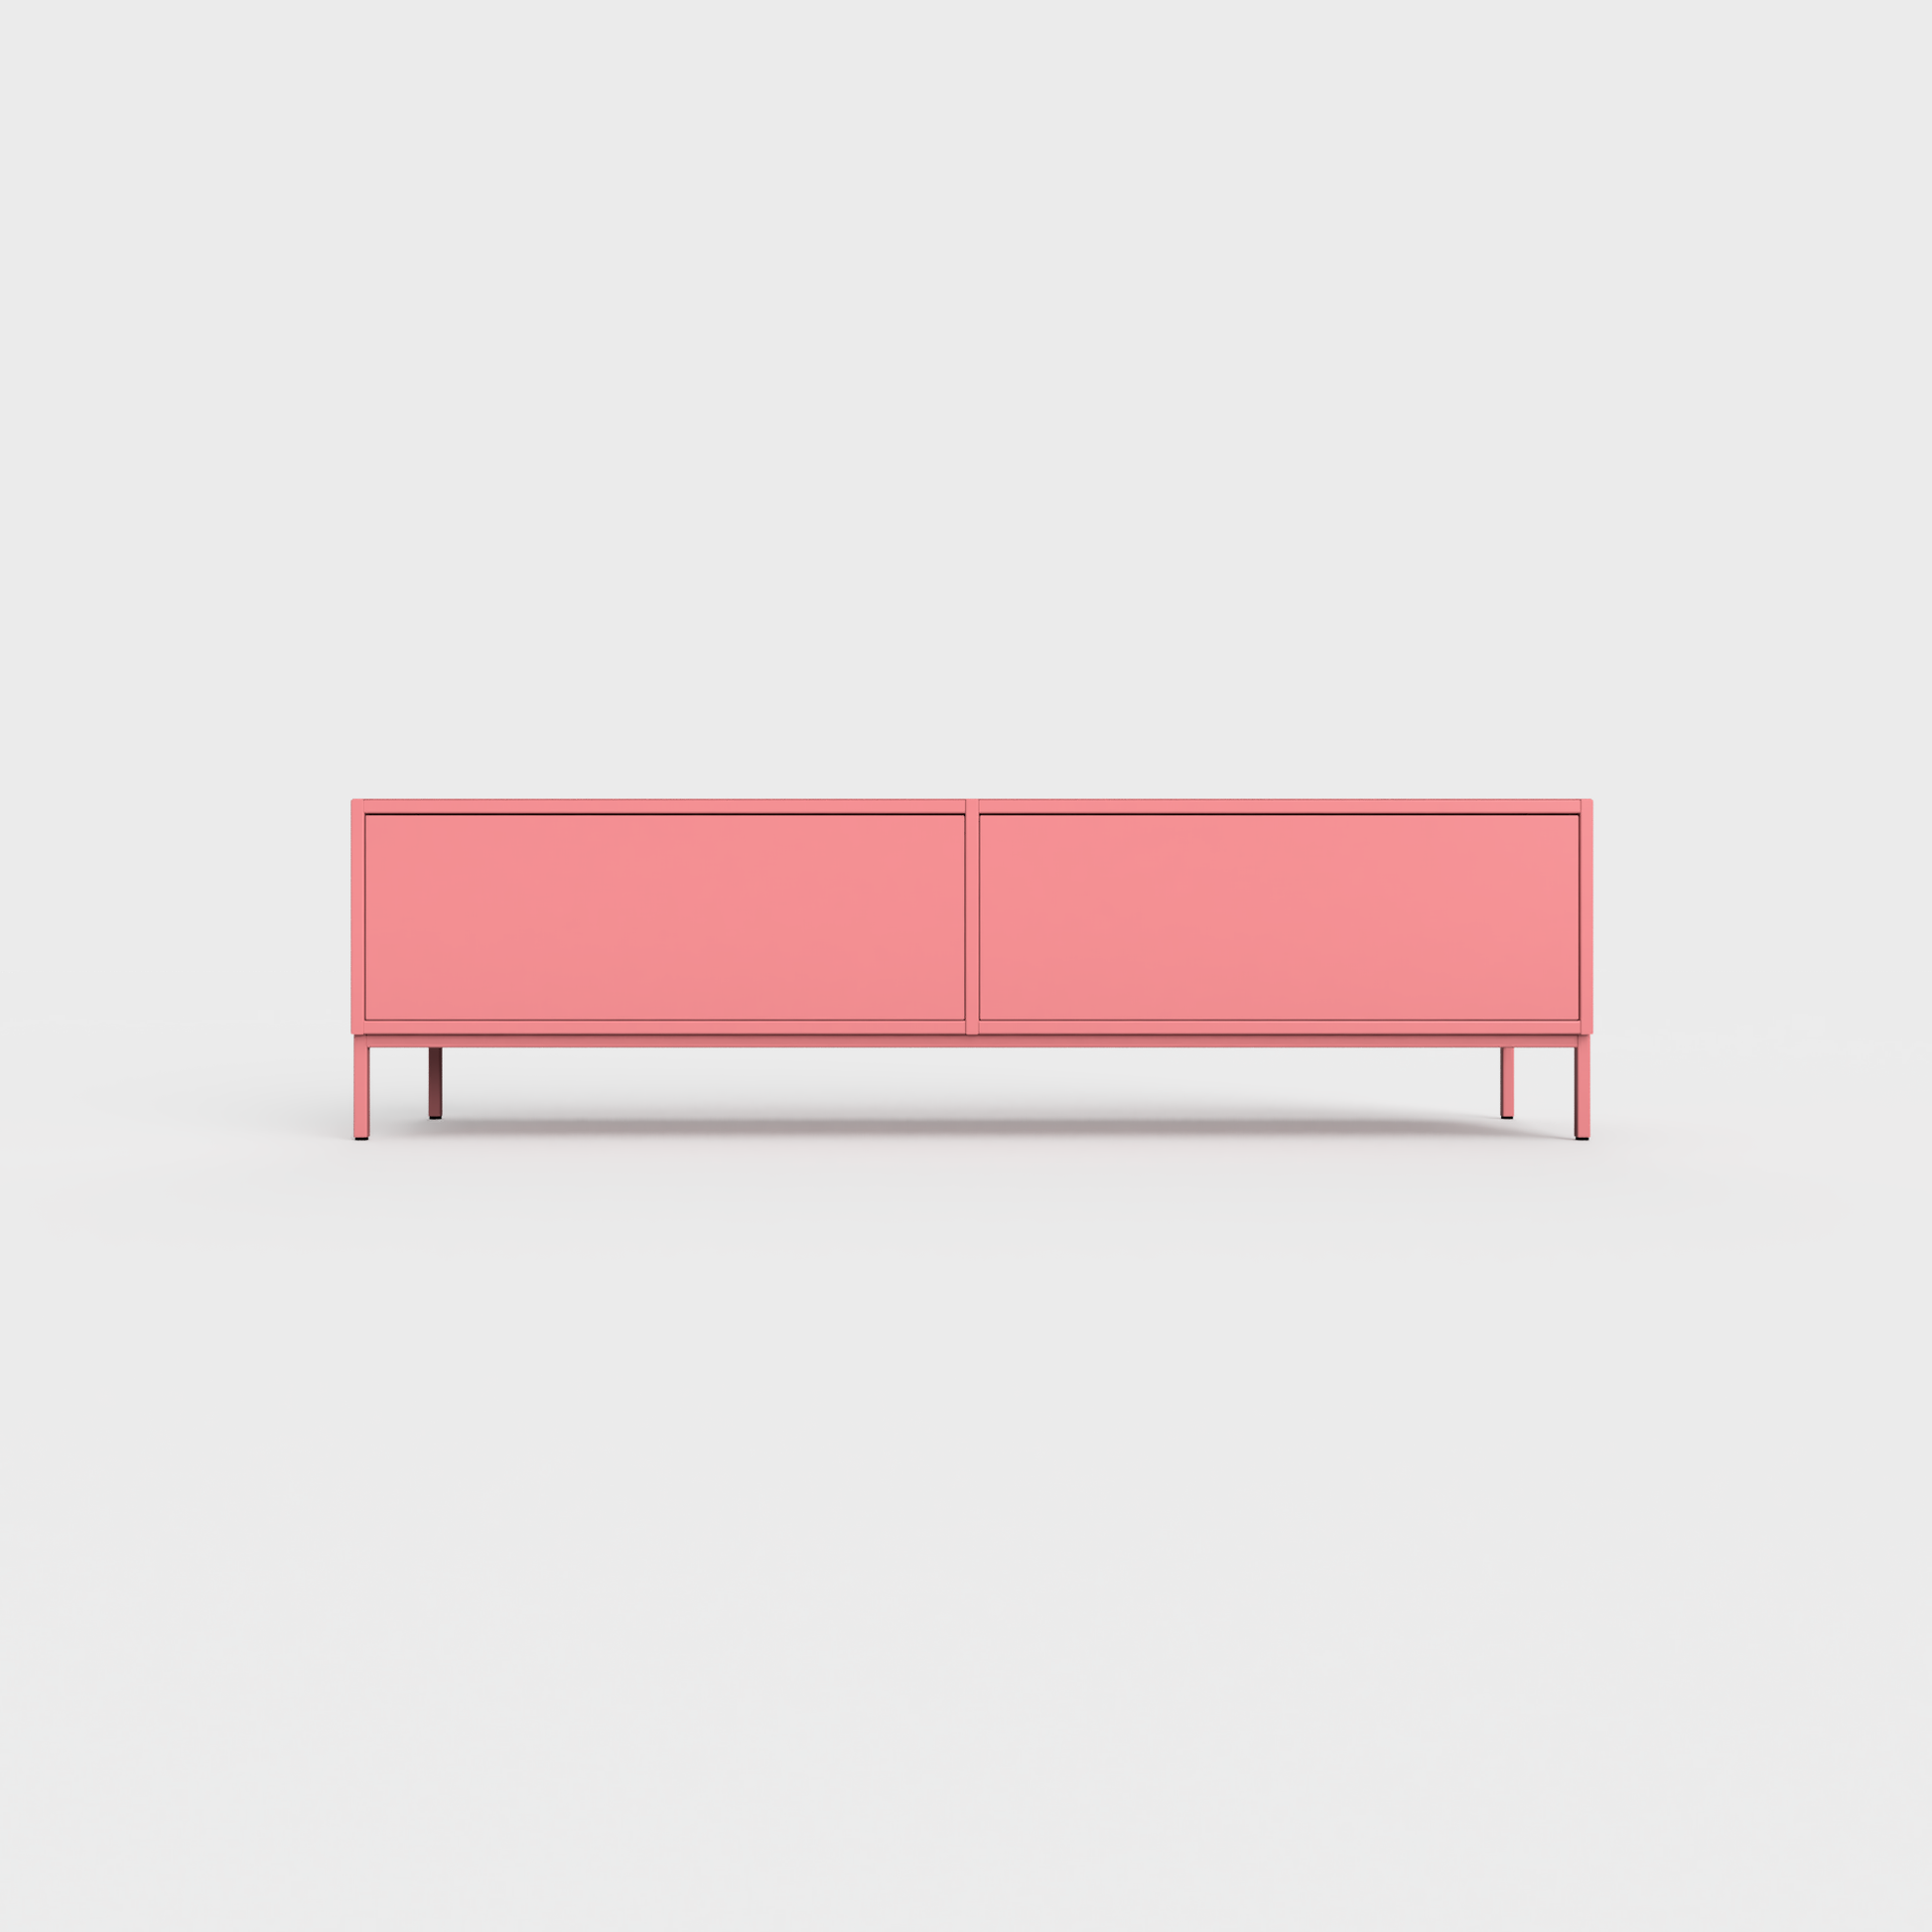 Prunus 01 Lowboard in Rose color, powder-coated steel, elegant and modern piece of furniture for your living room